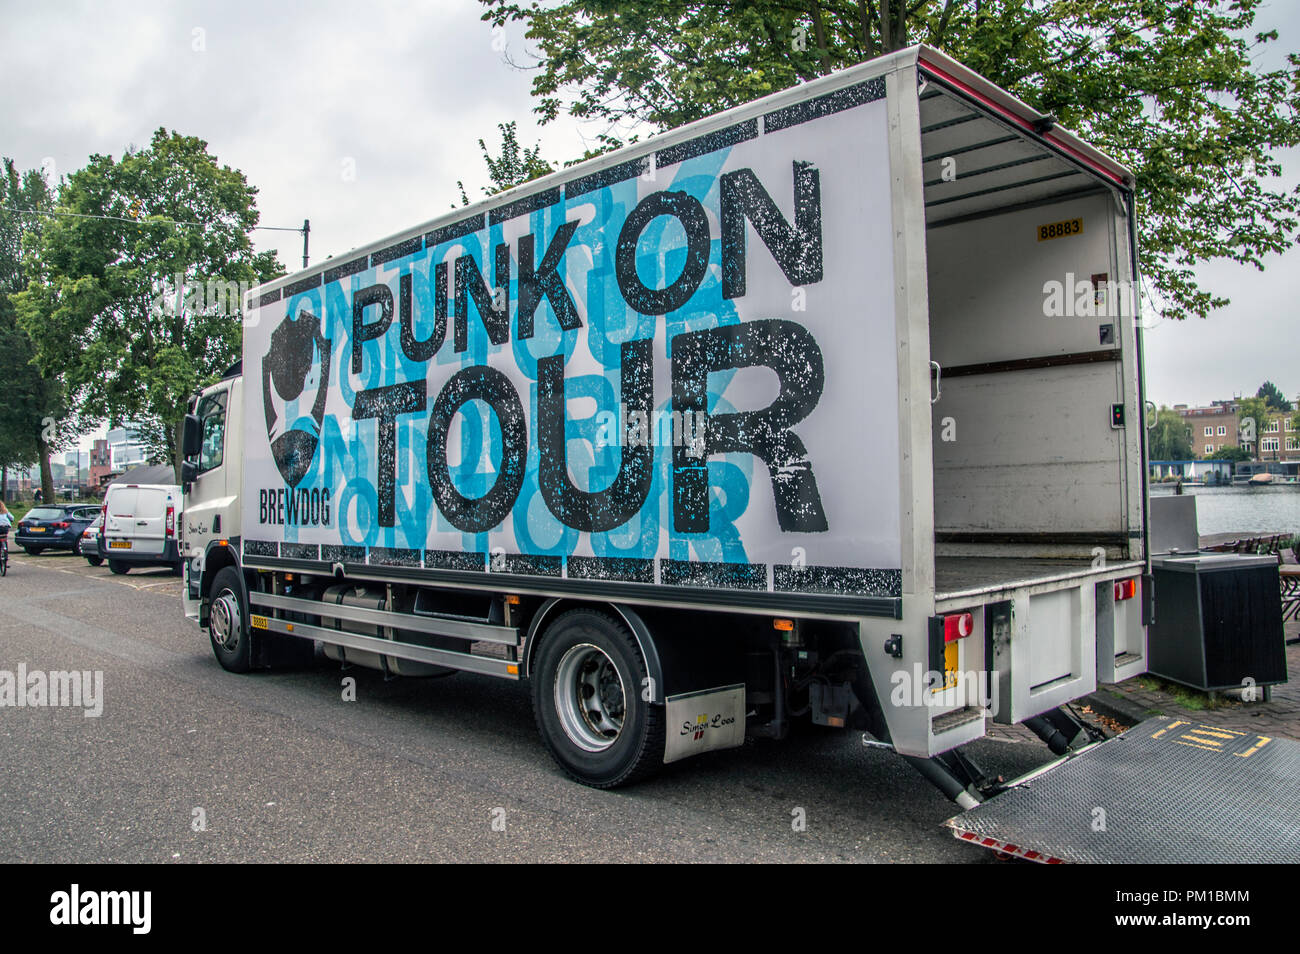 Brewdog Beer Company Truck At Amsterdam The Netherlands 2018 Stock Photo